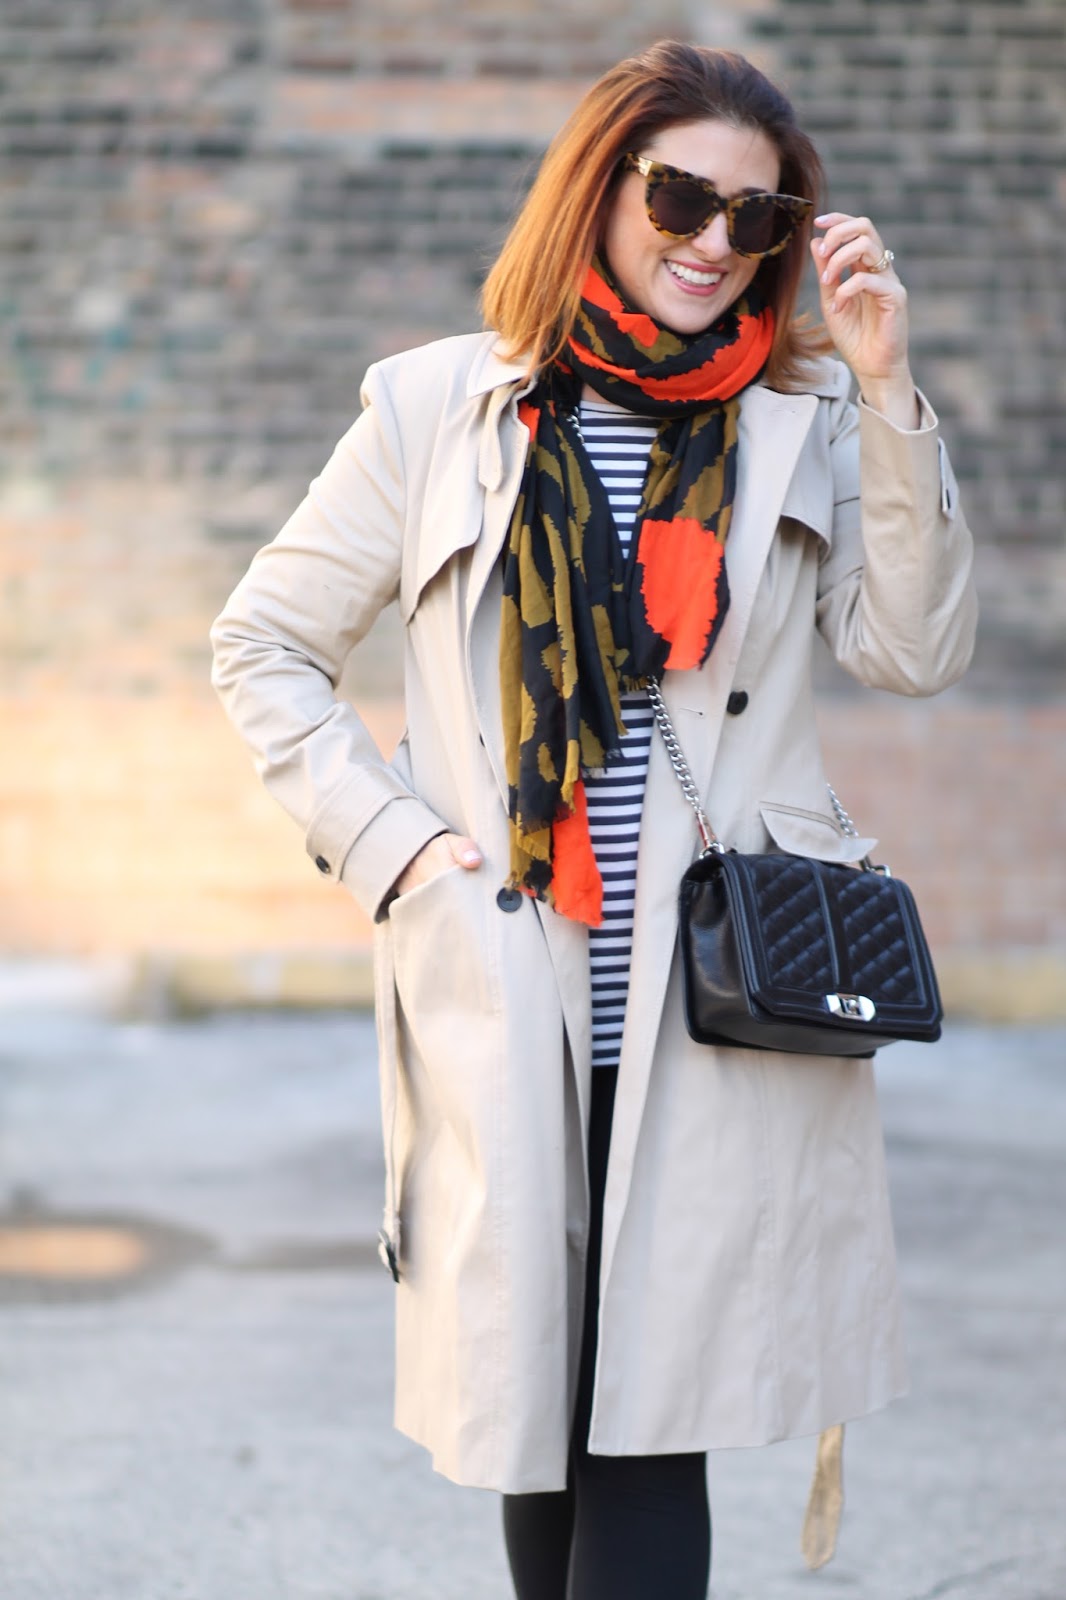 converse, red hair, causal outfit, trench coat, striped tee, outfit ideas, rebecca minkoff love crossbody, karen walker sunglasses